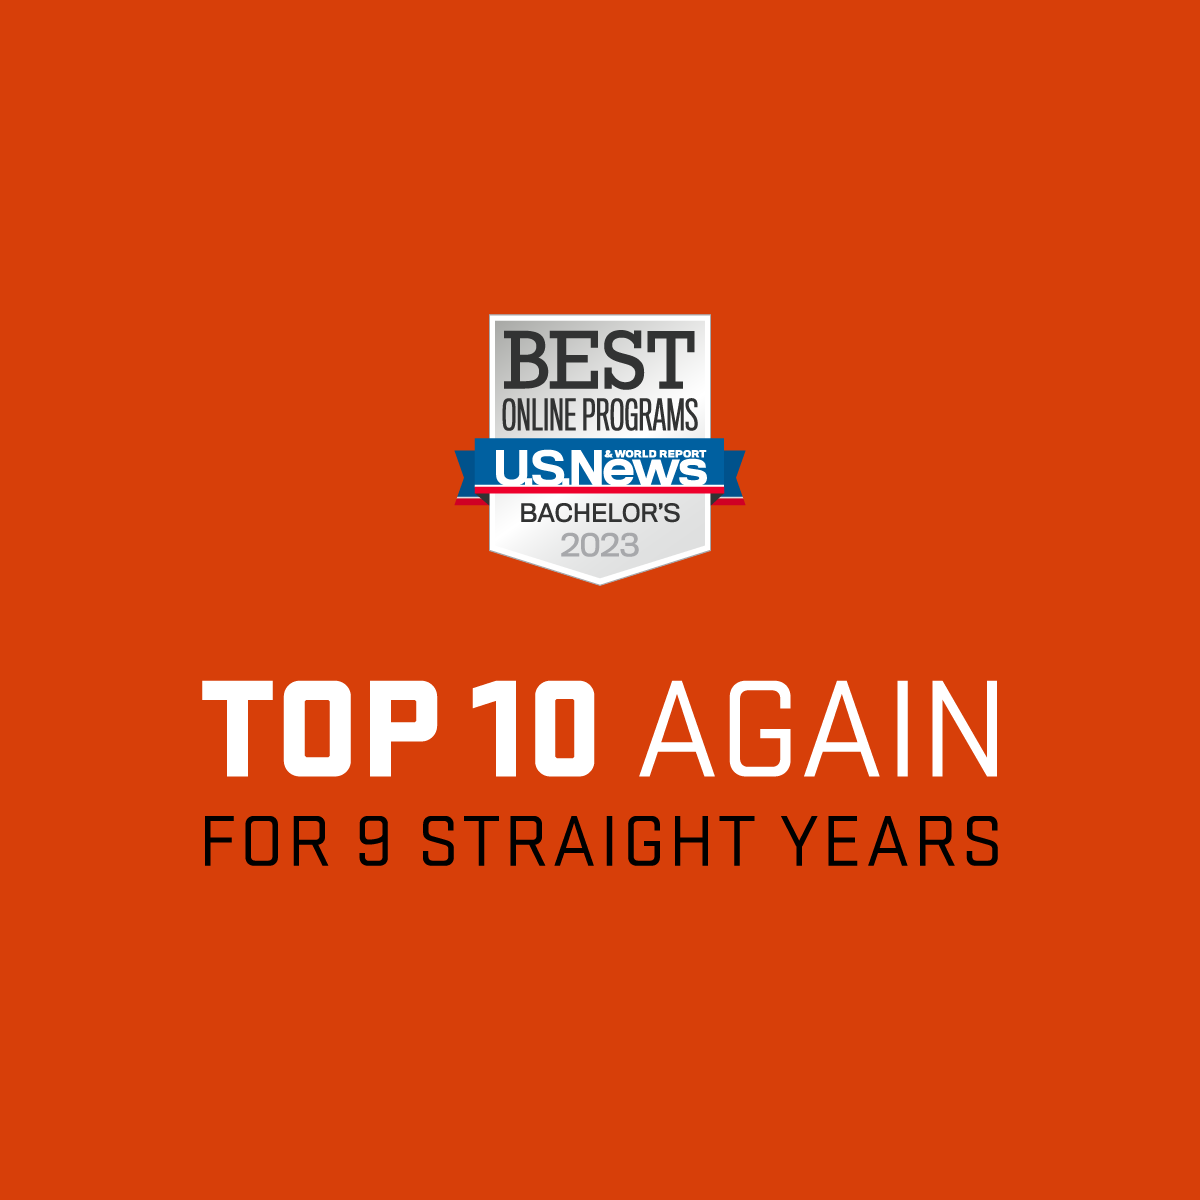 Bold text says: Top 10 again, for nine straight years below a US News best online programs badge